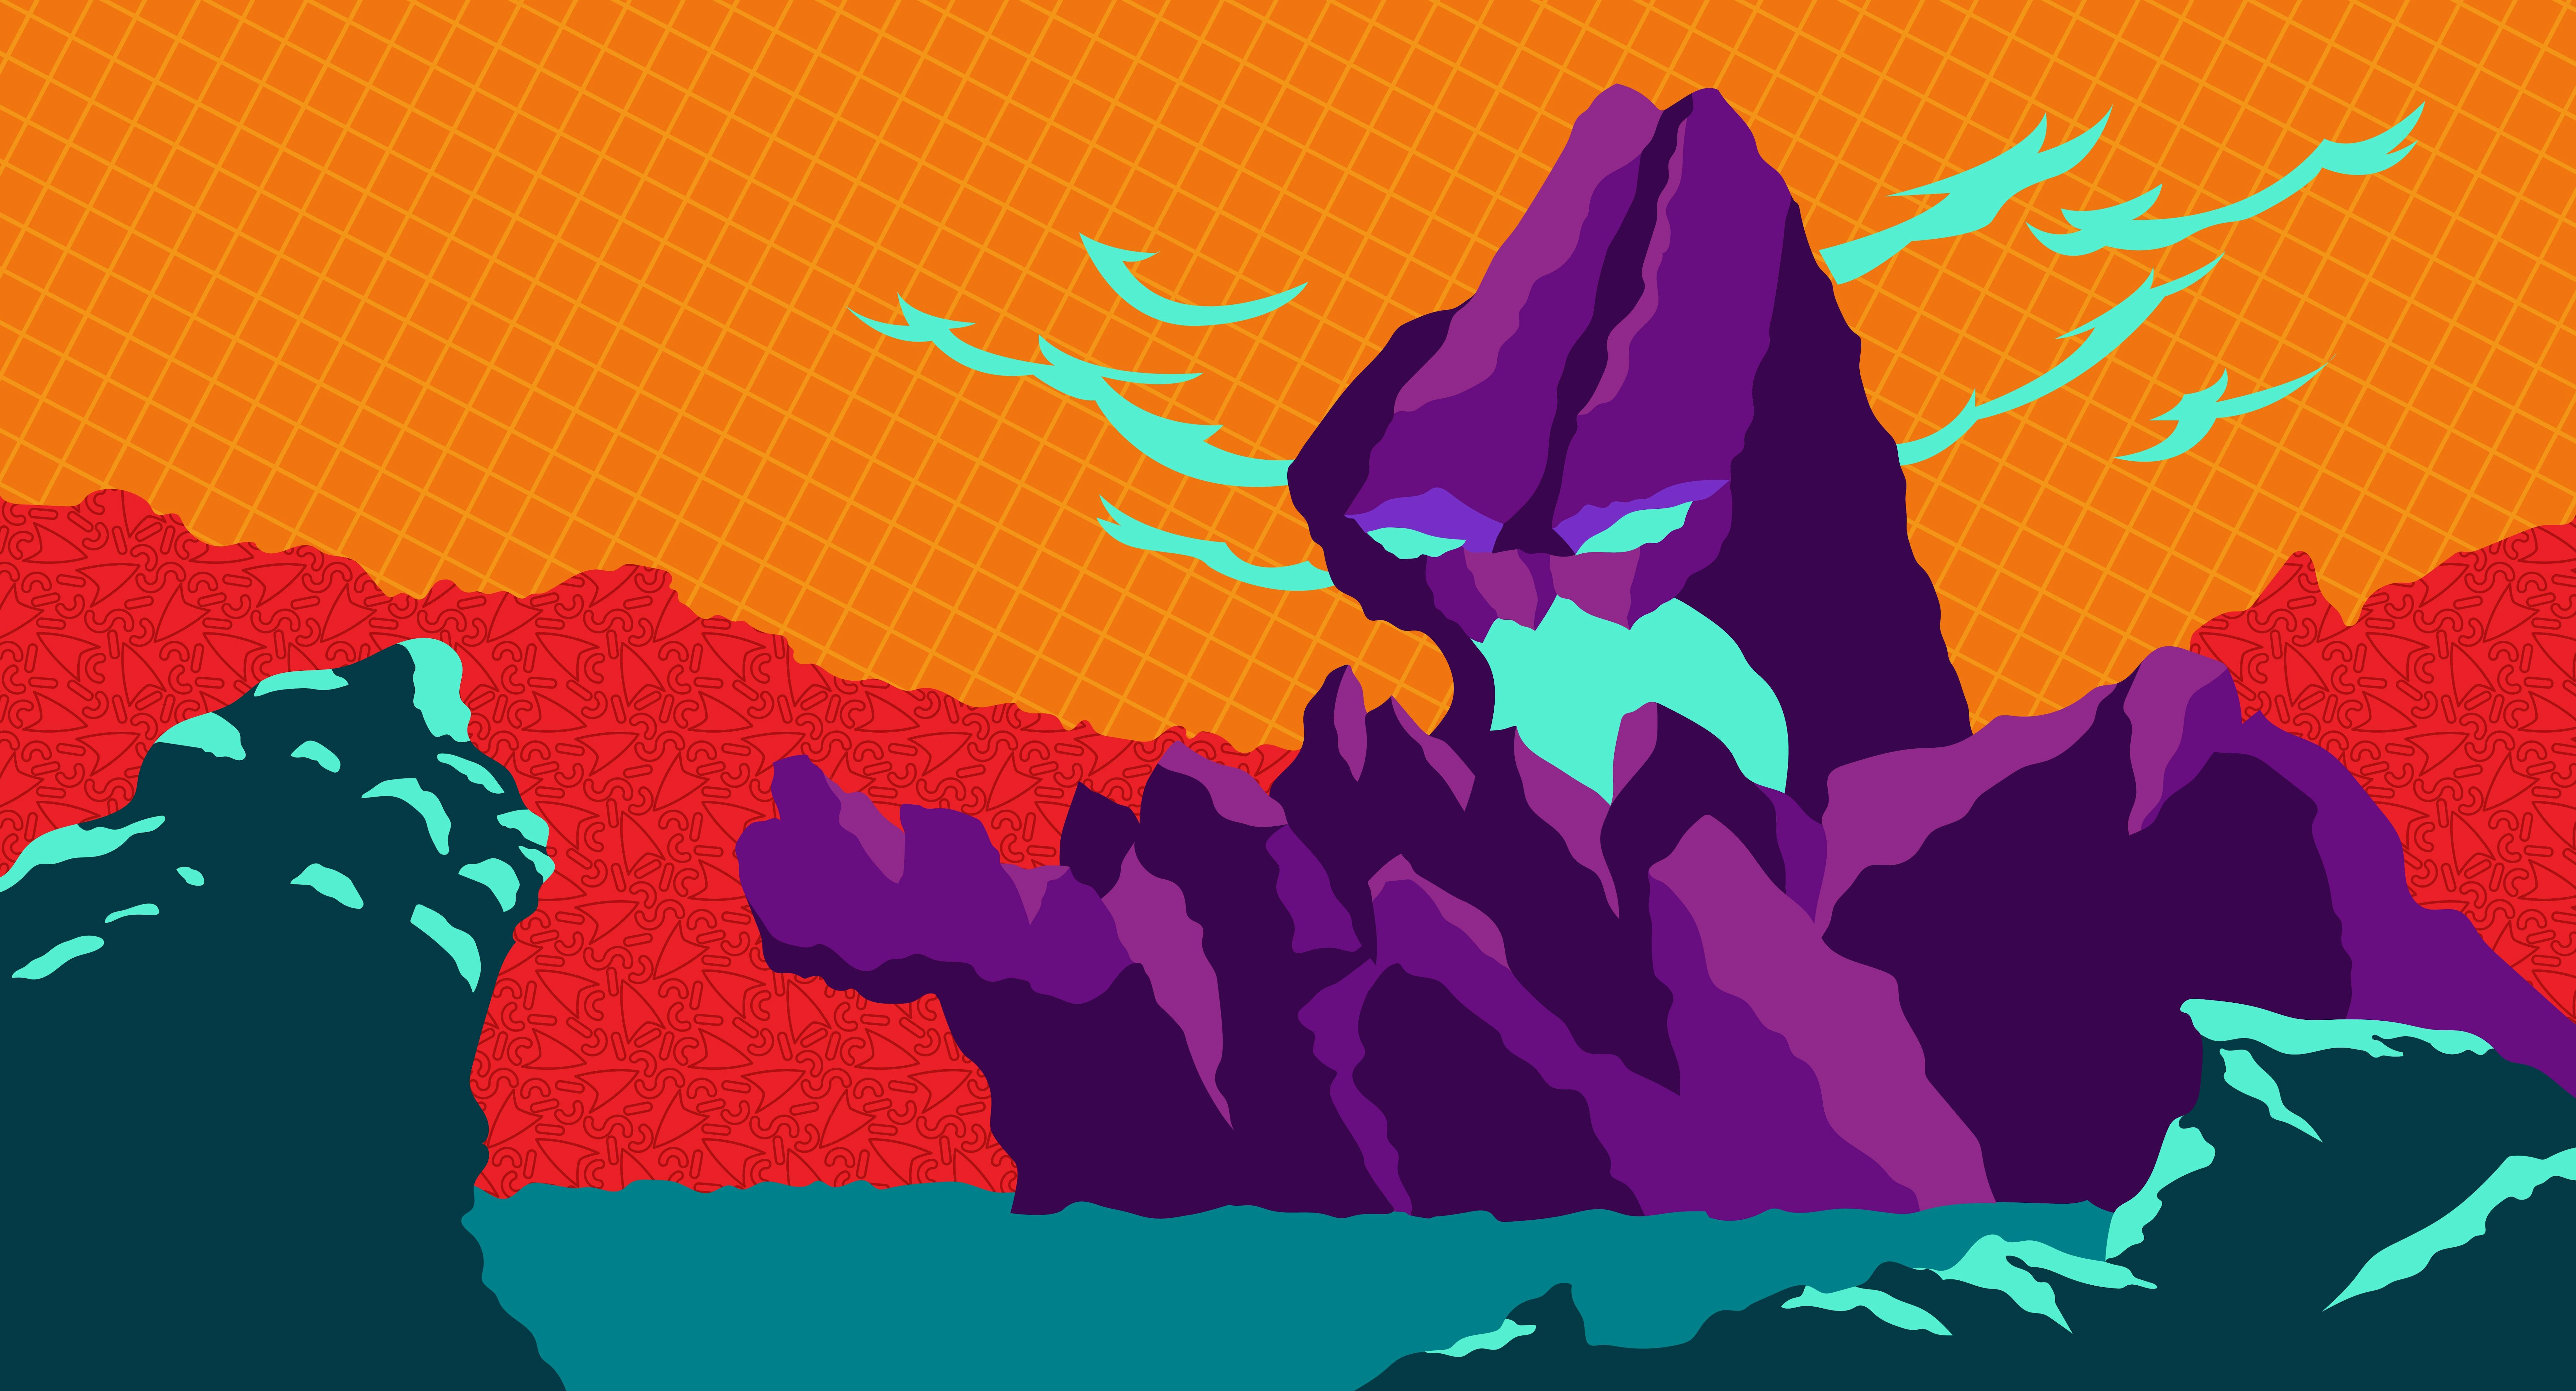 A purple rock monster against an orange and red background.